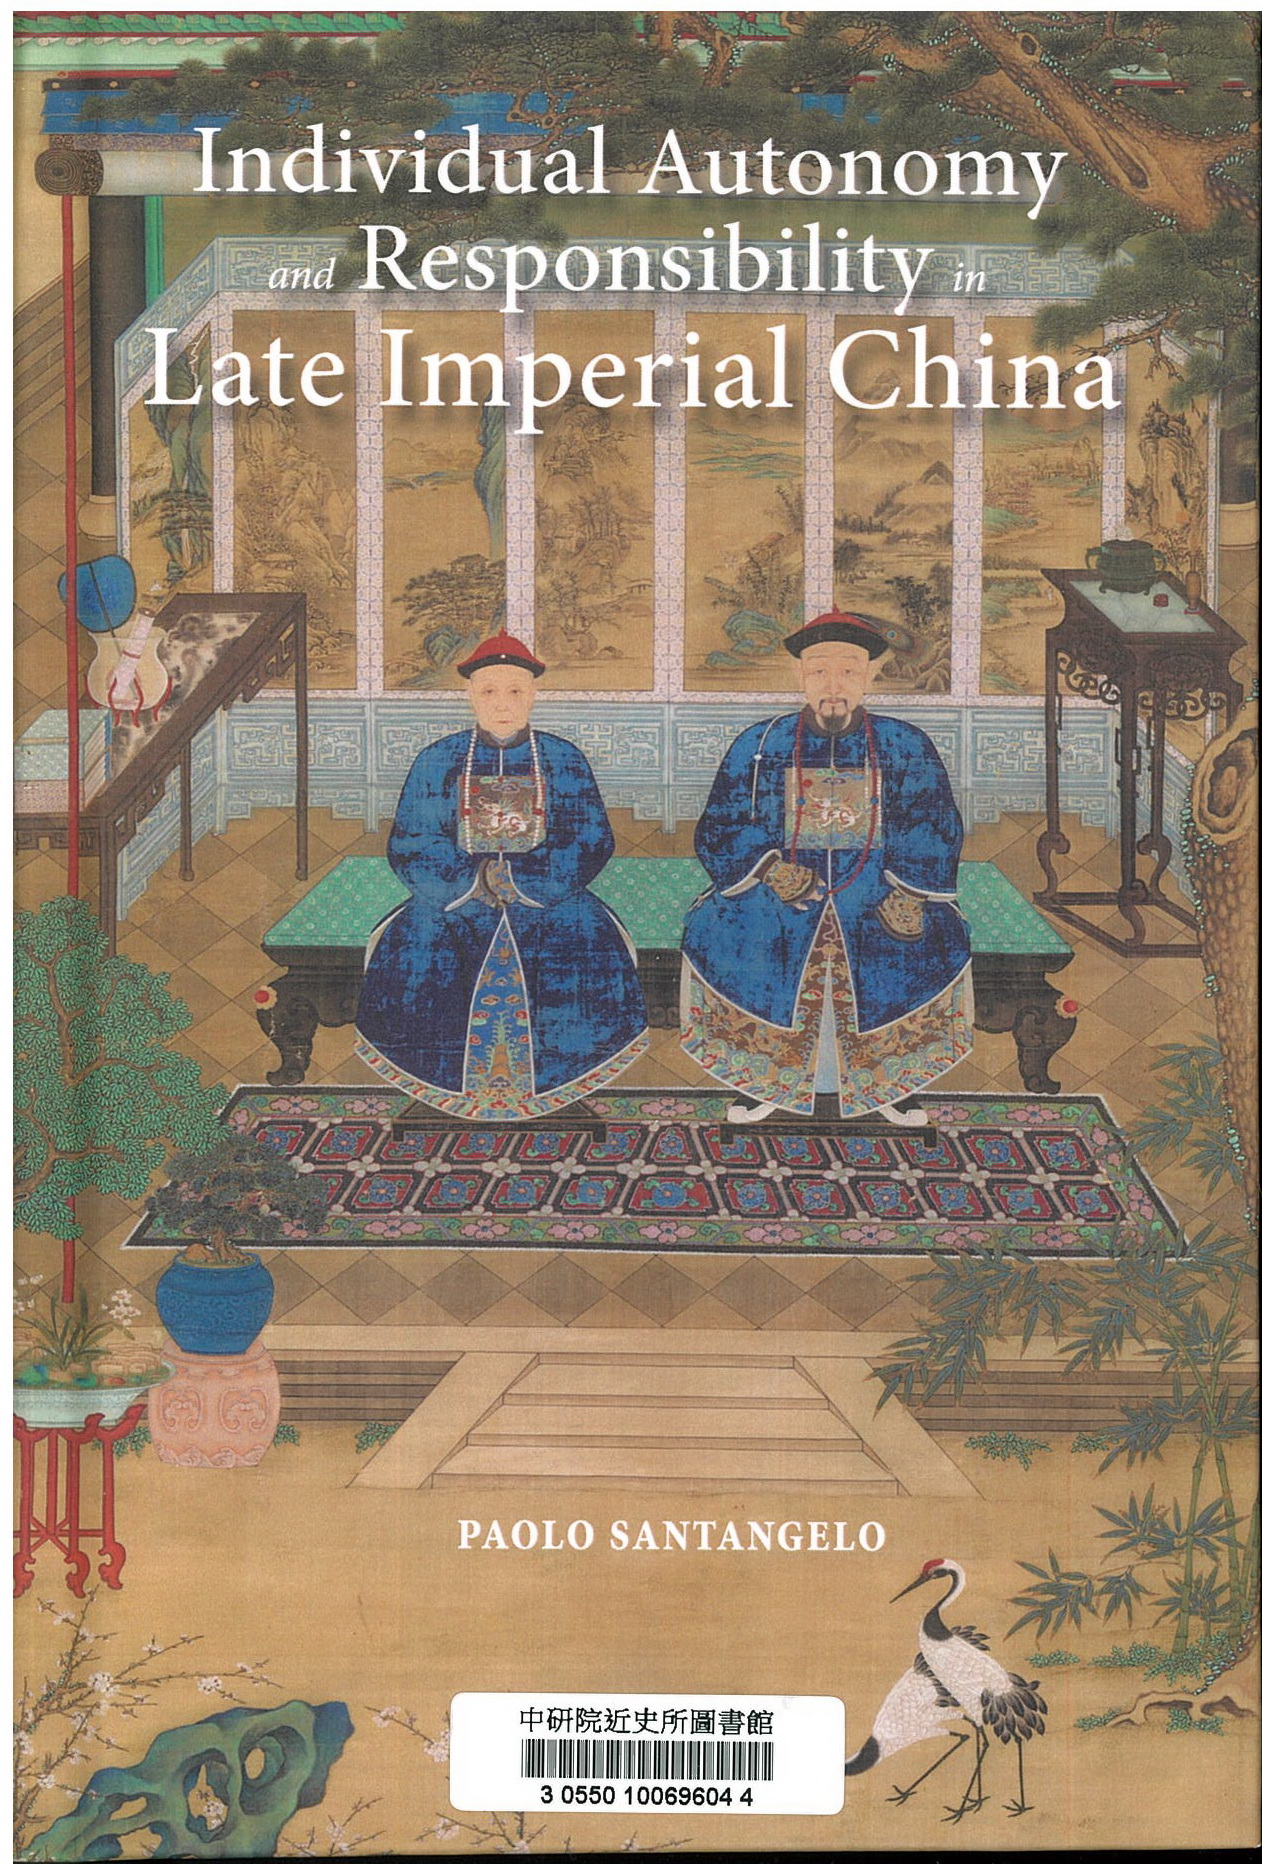 Individual autonomy and responsibility in late Imperial China